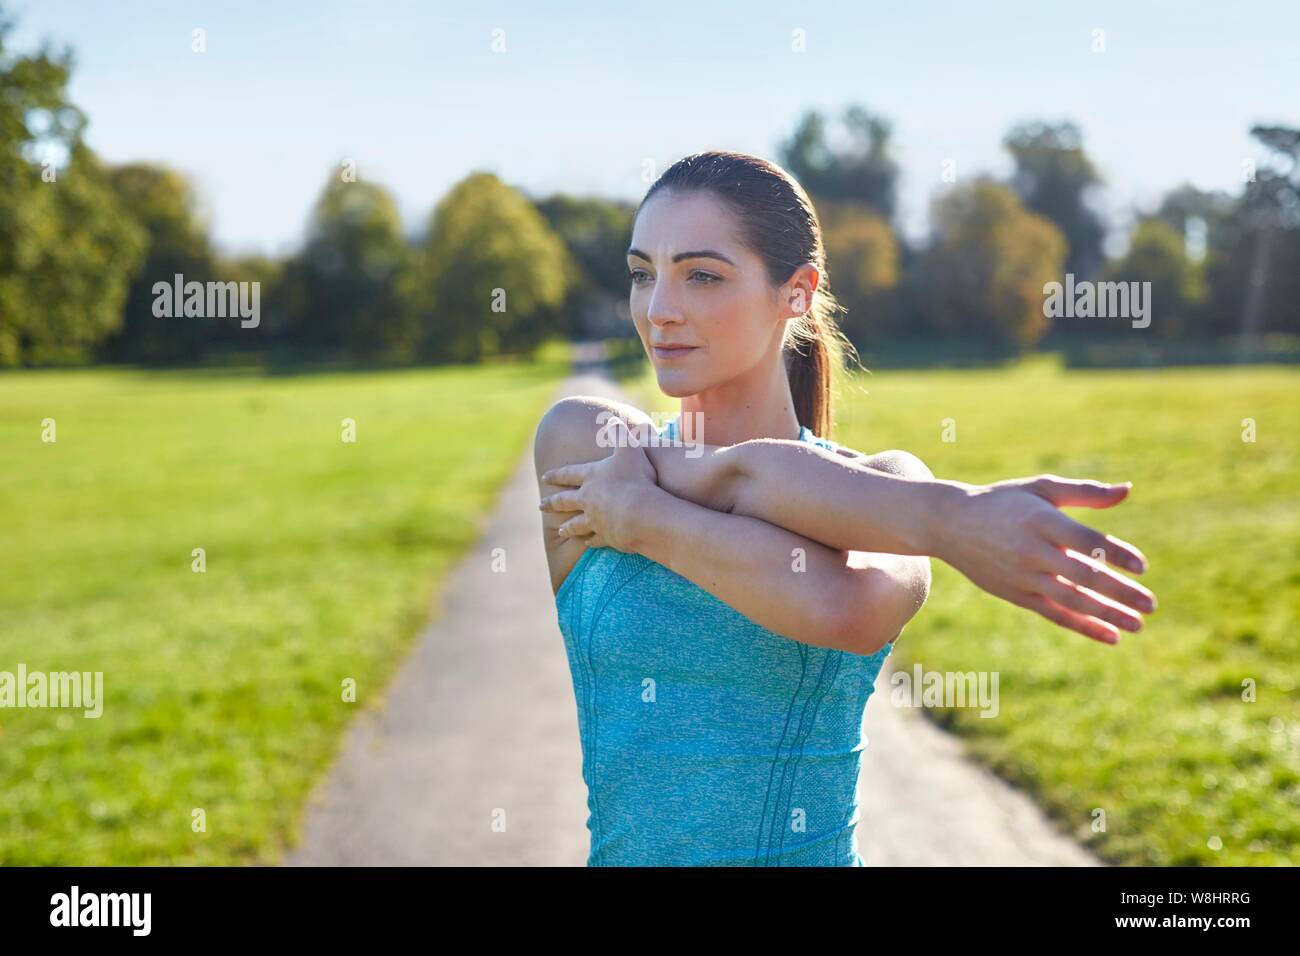 Young woman stretching arm. Stock Photo